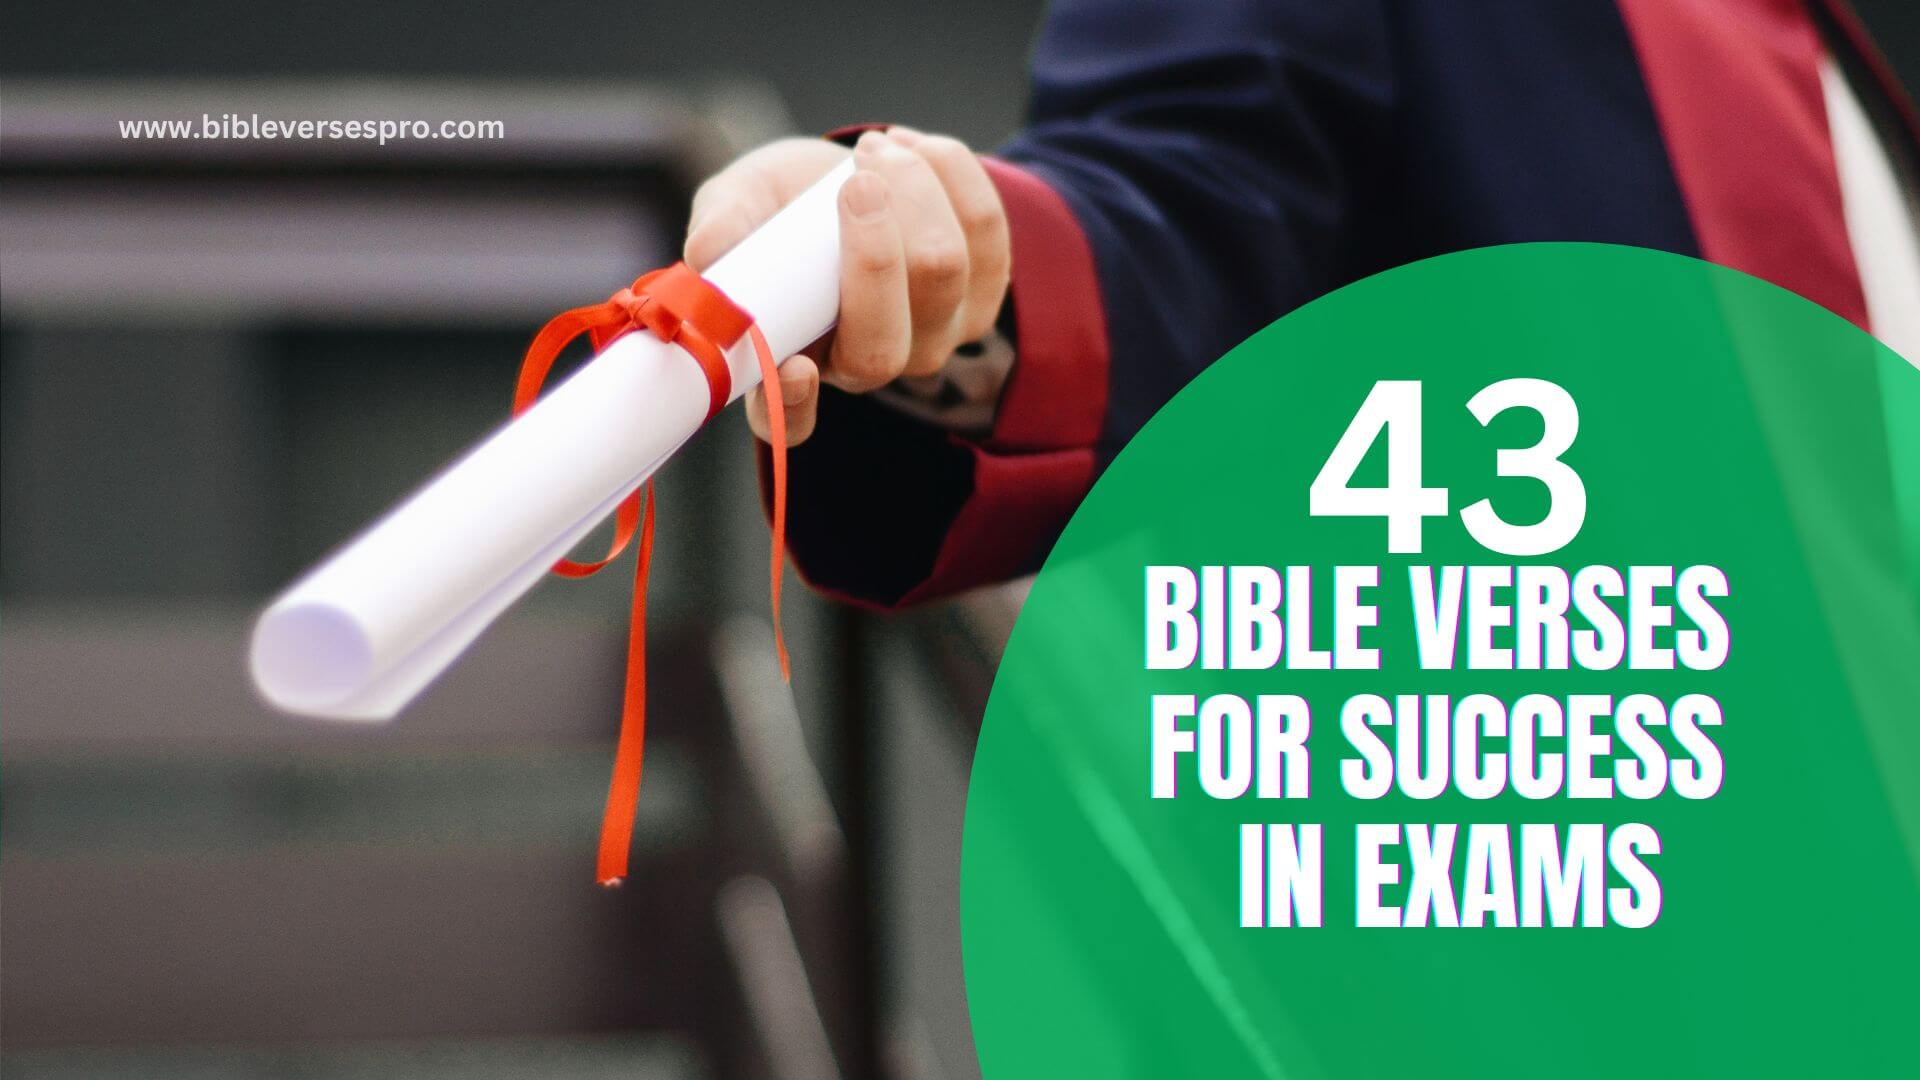 BIBLE VERSES FOR SUCCESS IN EXAMS